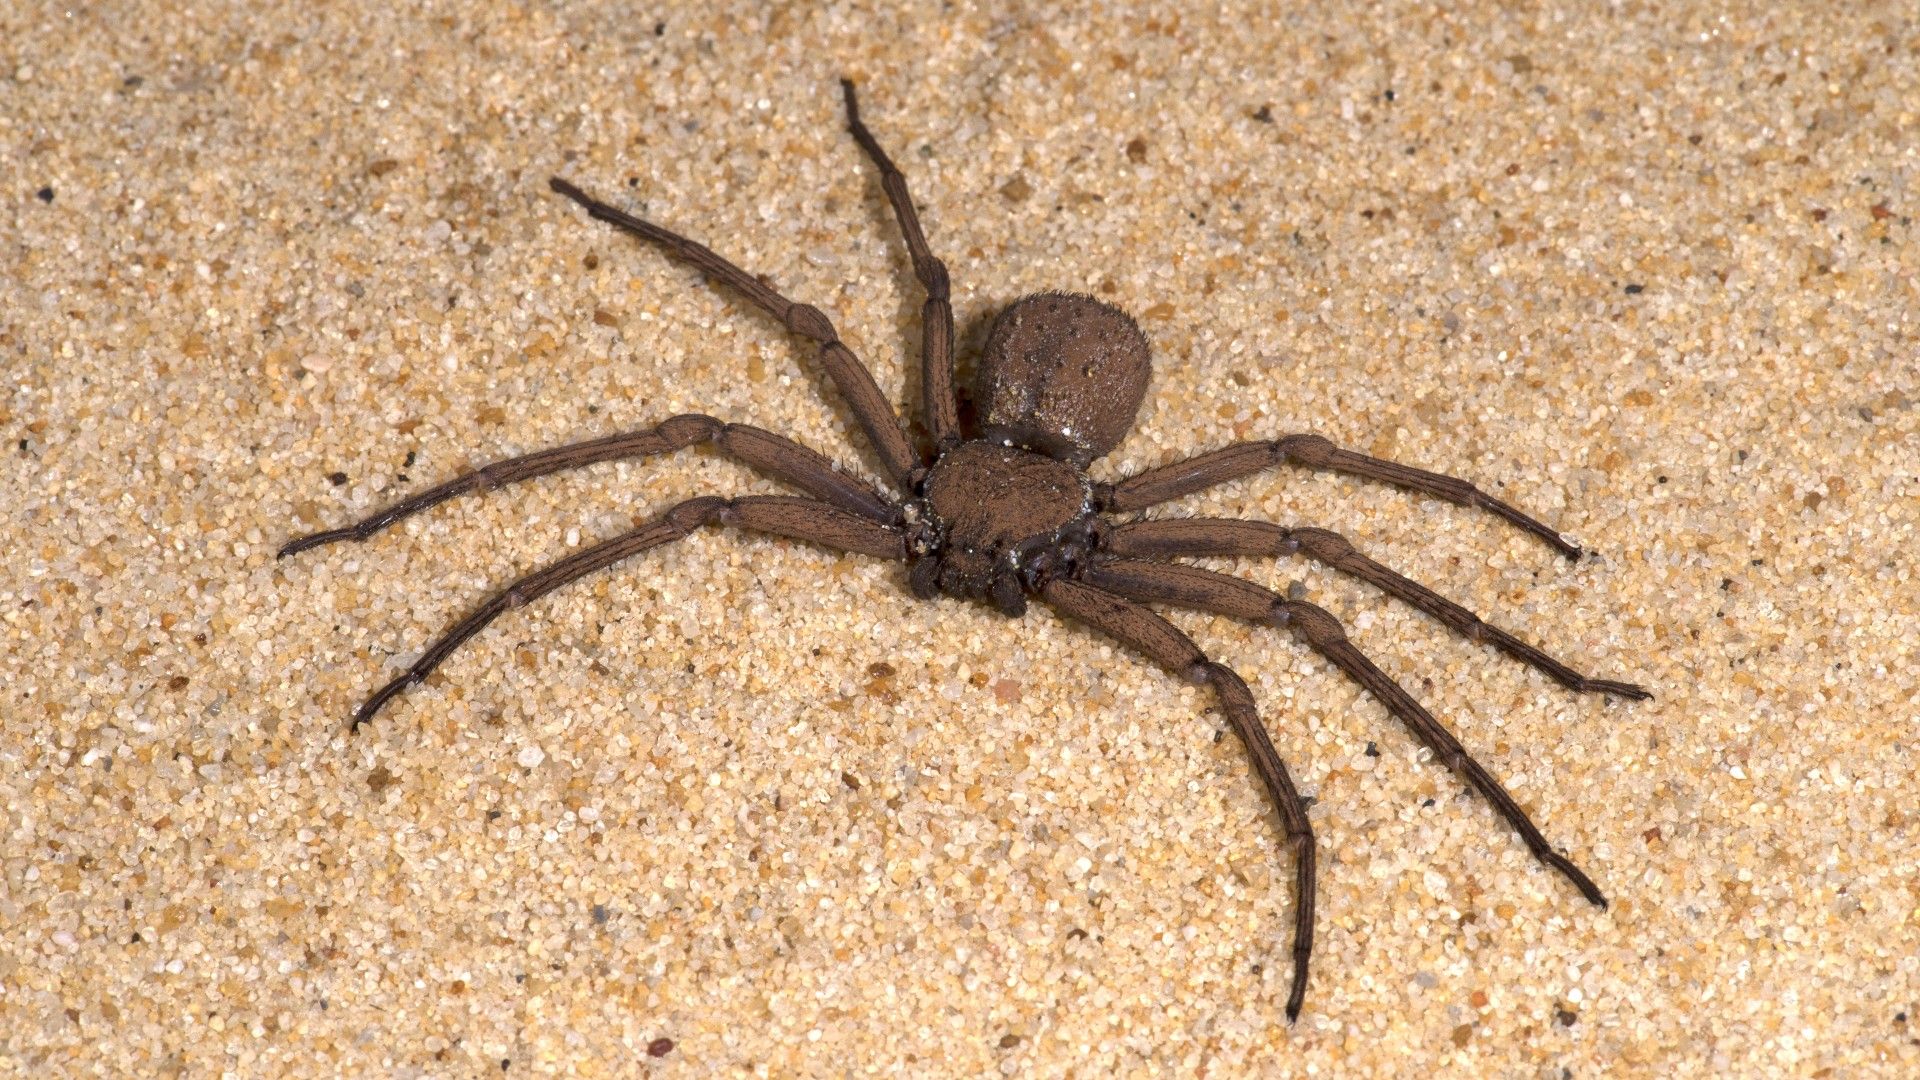 <p>                     Found in deserts in southern Africa, the six-eyed sand spider (<em>Hexophthalma hahni</em>) buries itself in the sand to ambush unsuspecting prey. The small, stiff hairs that cover the spider helps to hold sand particles in place, adding to its camouflage. It's otherwise known as the six-eyed crab spider due to its crab-like legs.                   </p>                                      <p>                     Another arachnid that produces venom with necrotic effects, the six-eyed sand spider is the most venomous of any of its arachnid relatives, toxicology studies reveal. Scientists have found that there are proteins within their venom that can cause tissue destruction, blood vessel leakage, and thinning of the blood. No antivenom currently exists.                   </p>